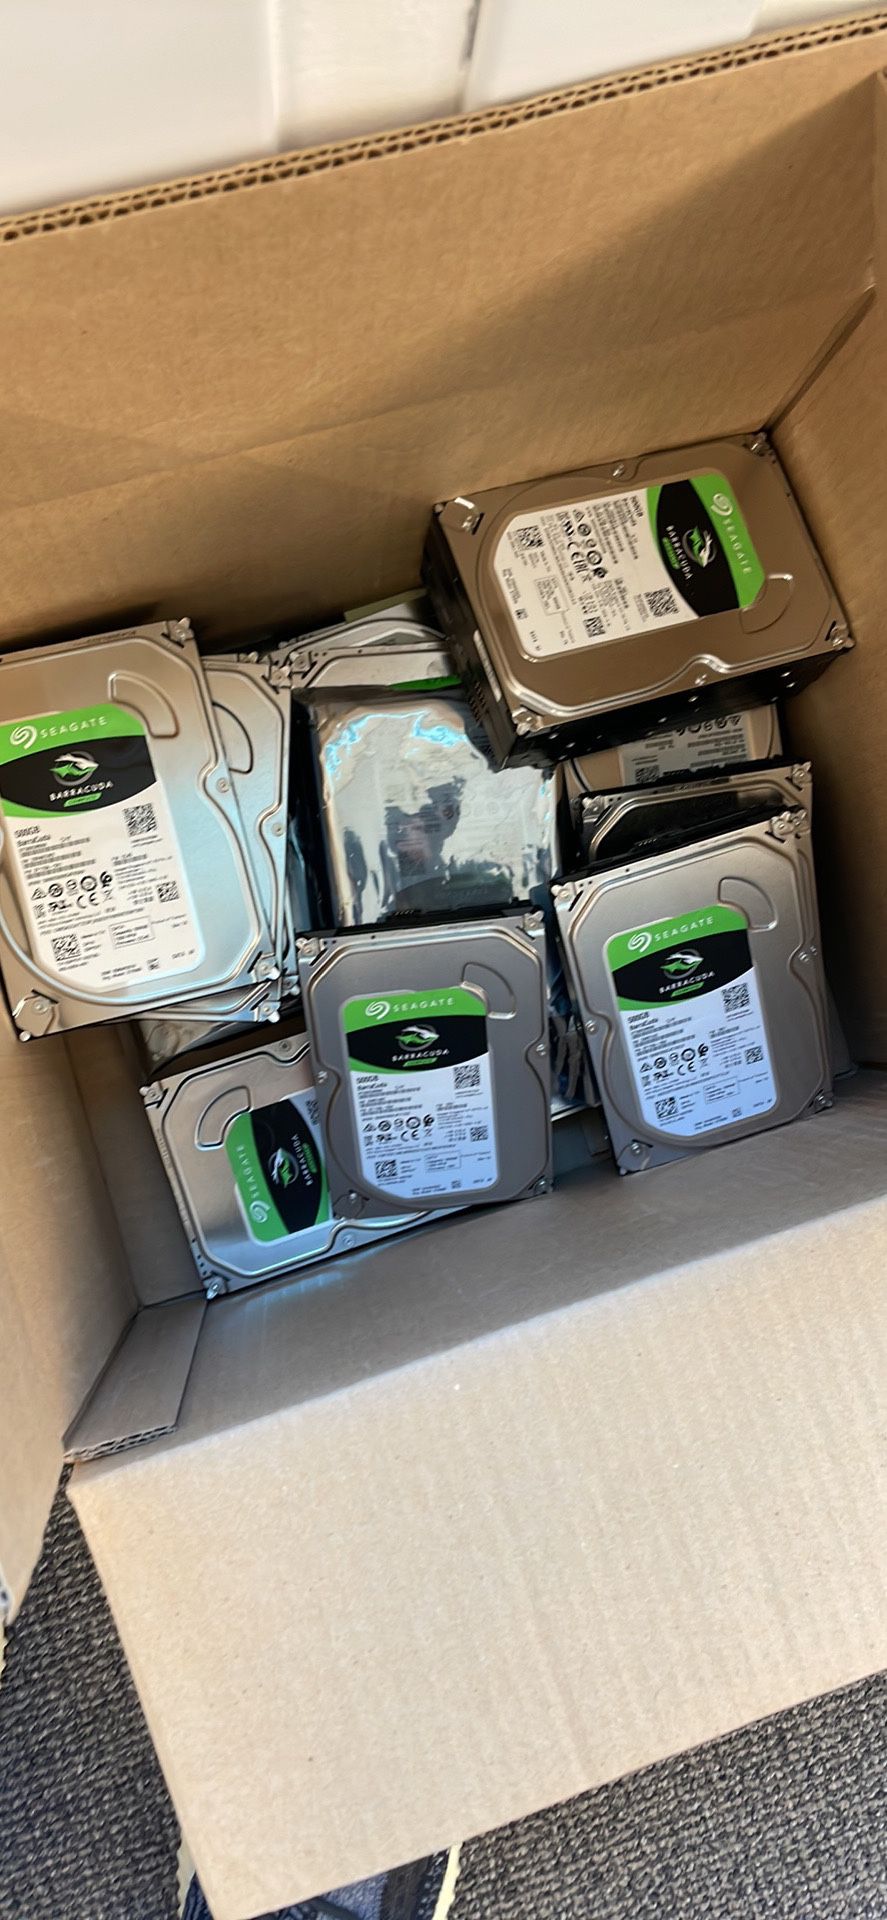 Sata Hard Drives  500gb Price Is For Each